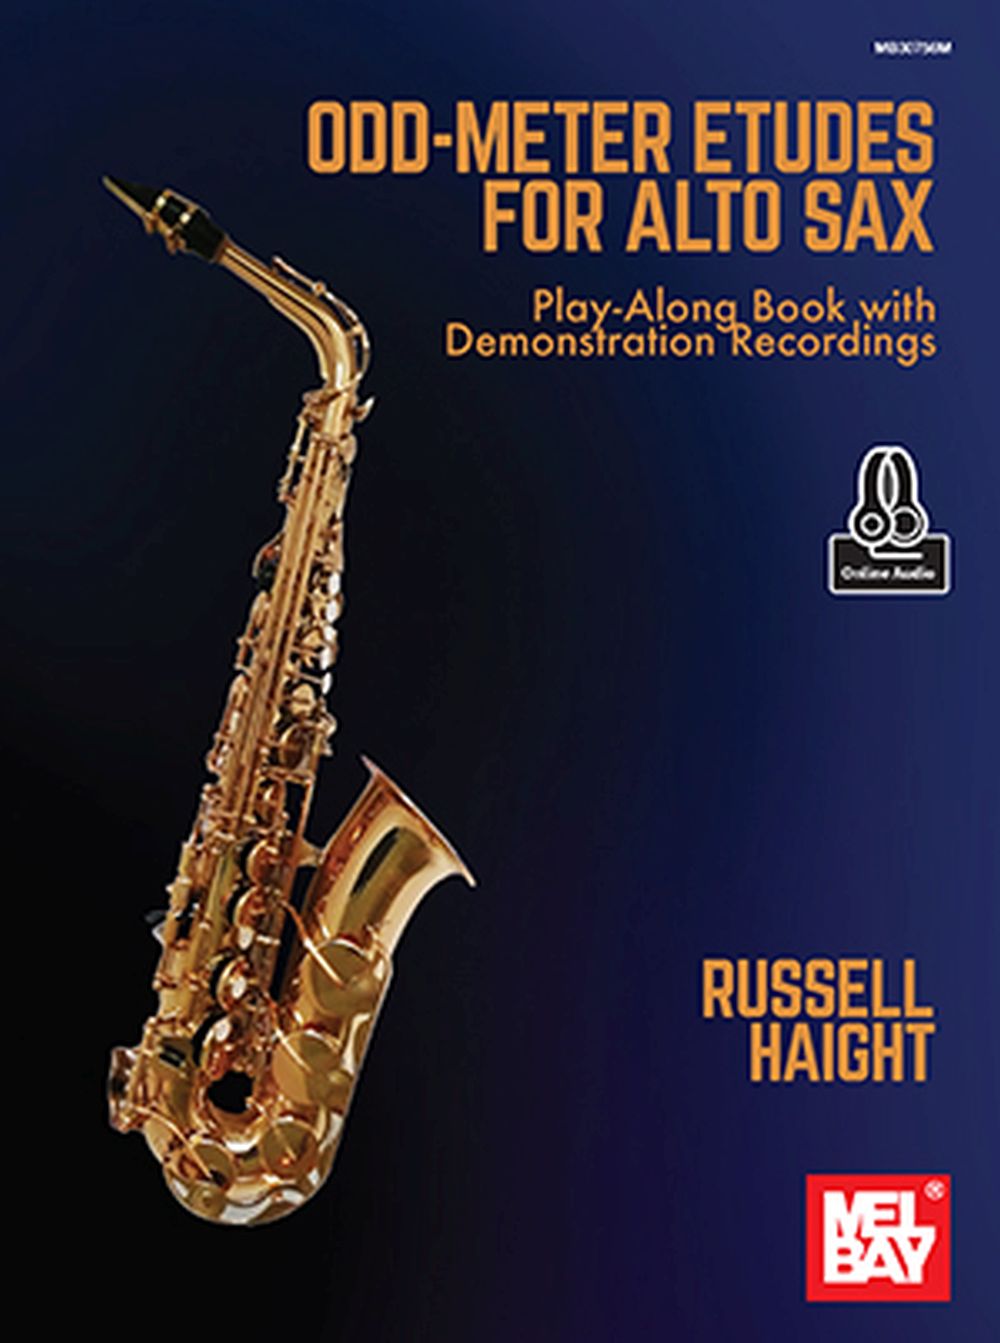 Odd-Meter Etudes For Alto Sax (HAIGHT RUSSELL)